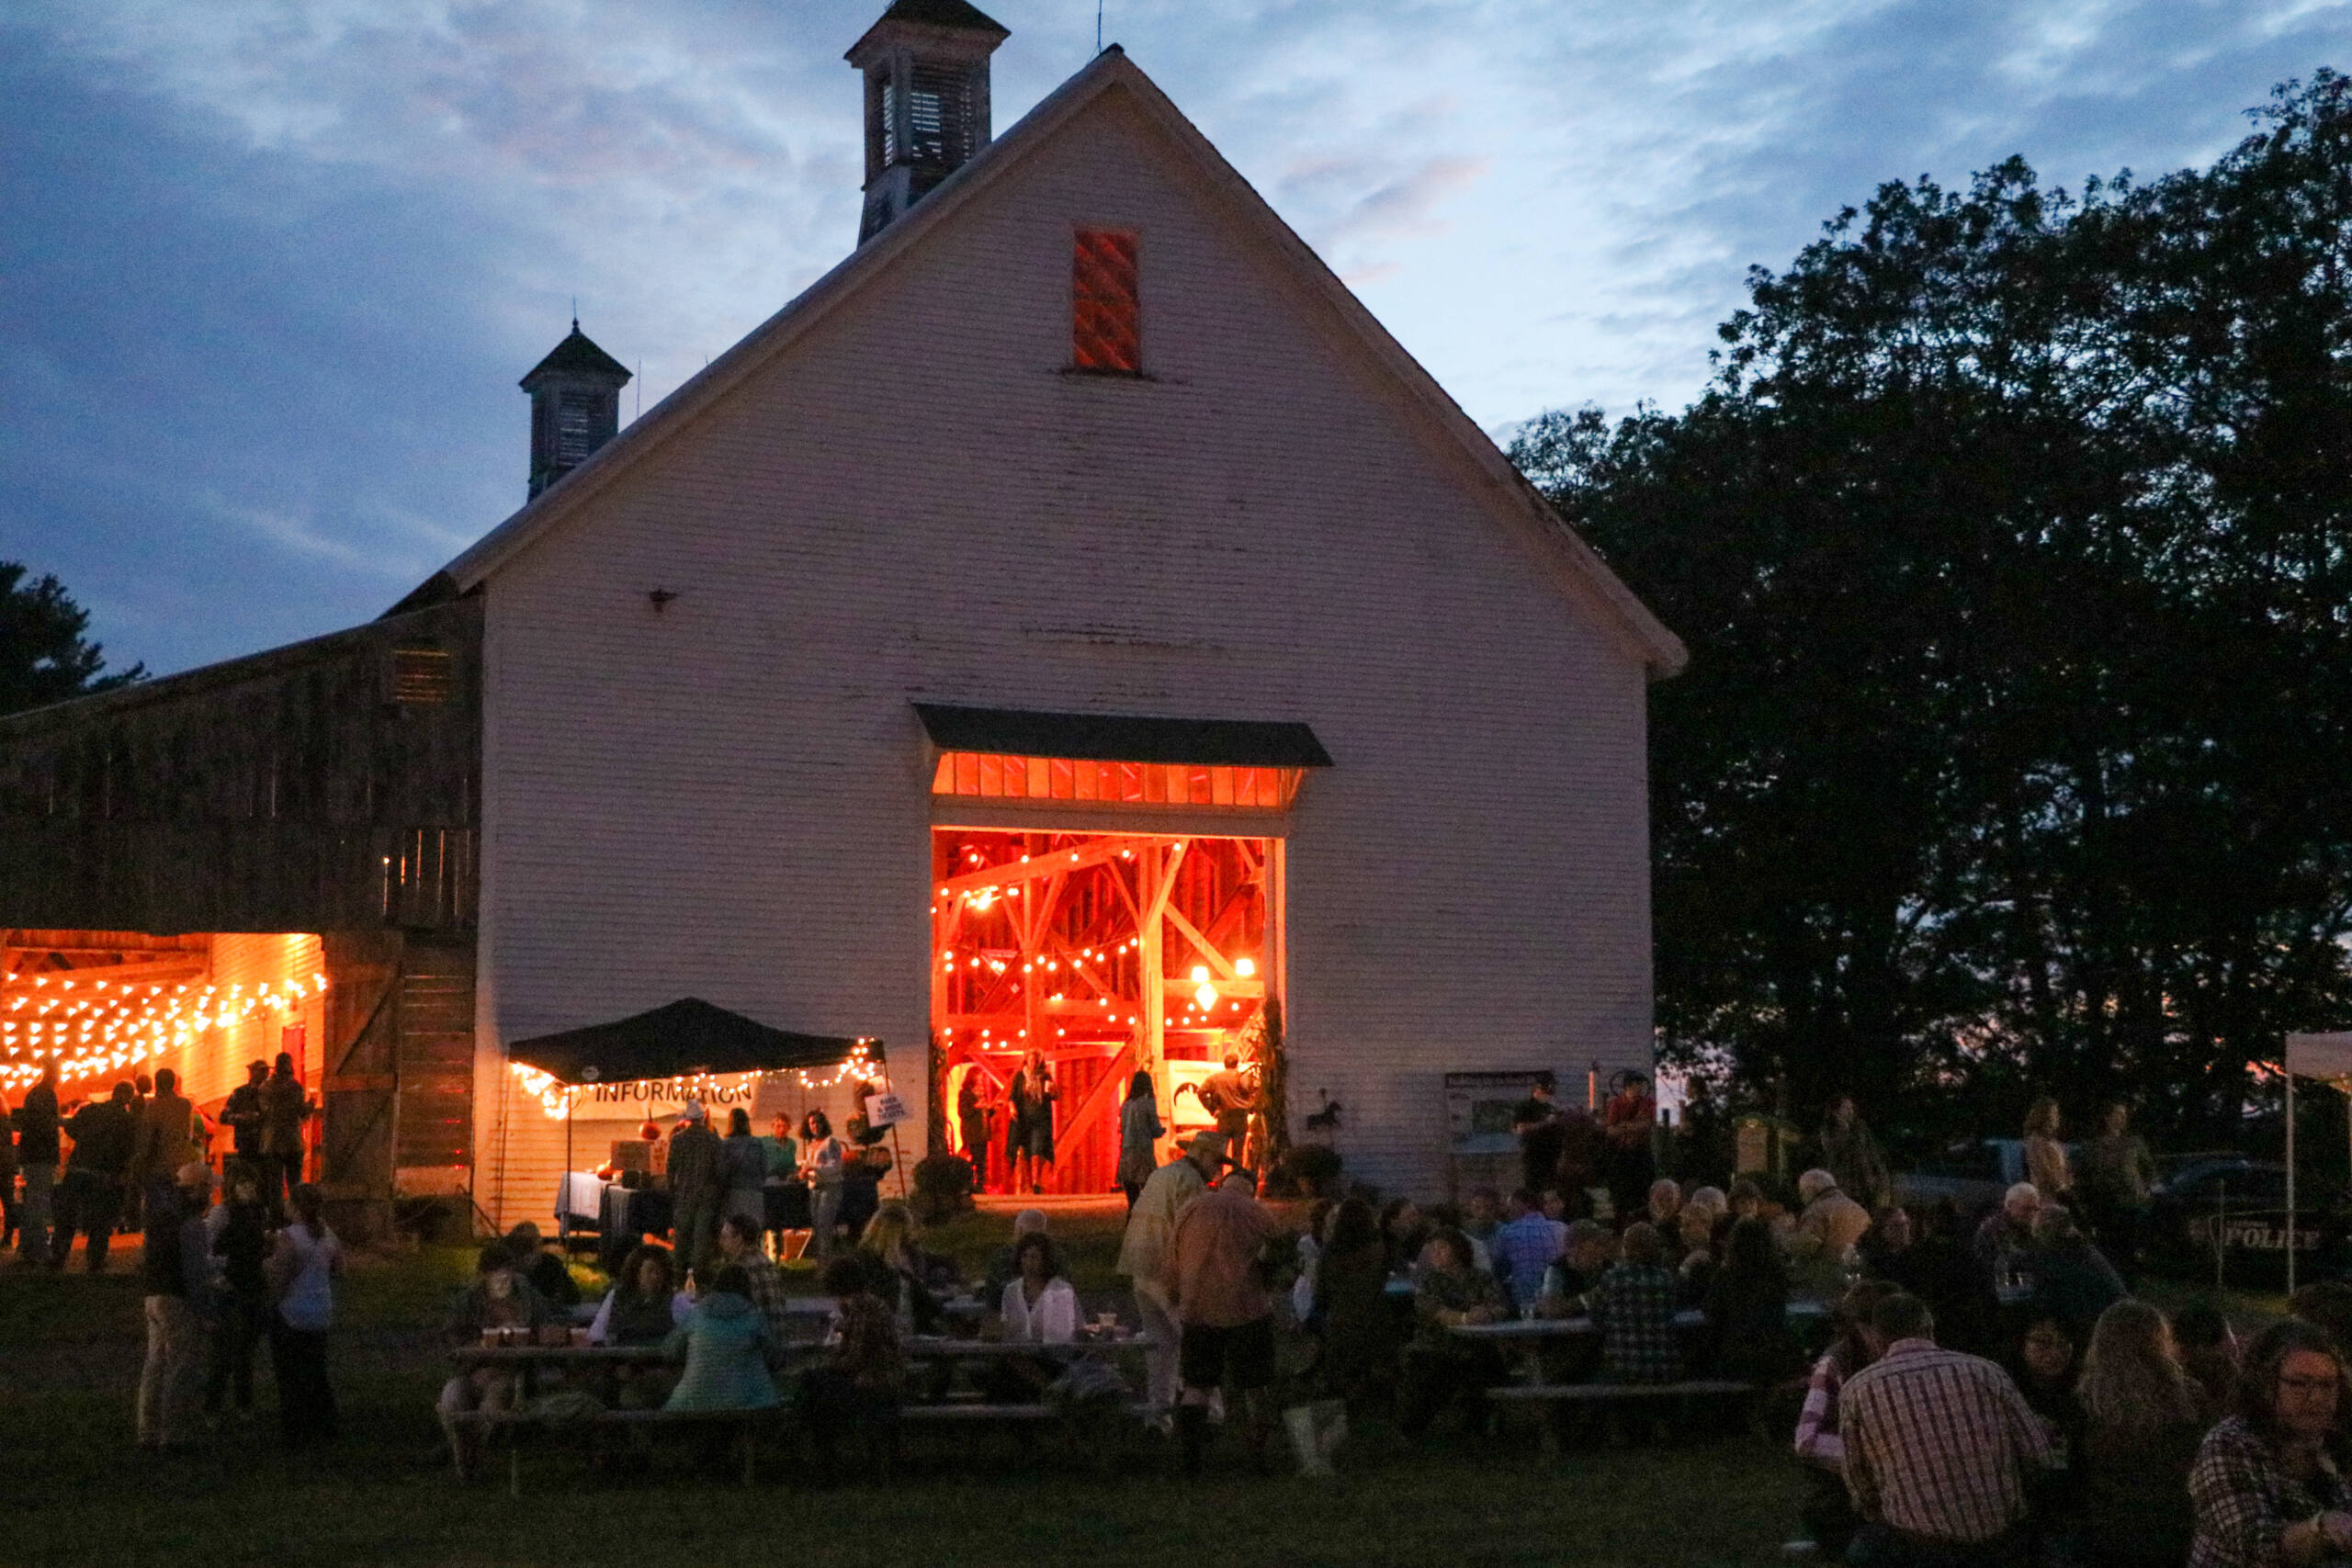 An event at a large barn